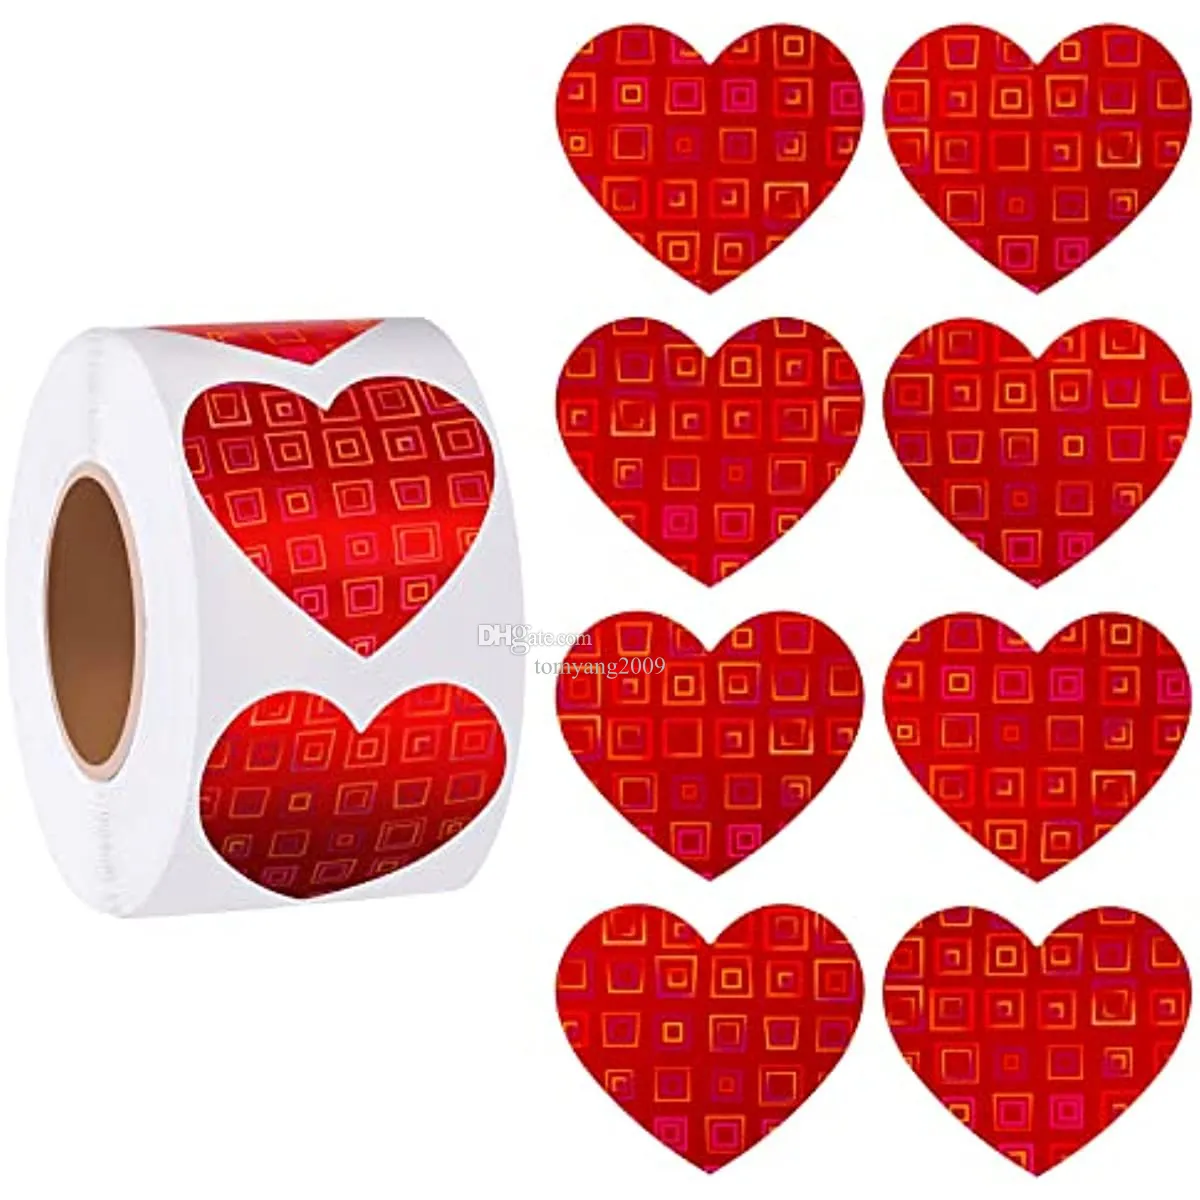 500Pcs/Roll Love Heart Shaped Sticker Seal Labels Birthday Party Gift Packaging Cute Stationery Sticker Scrapbooking for Craft